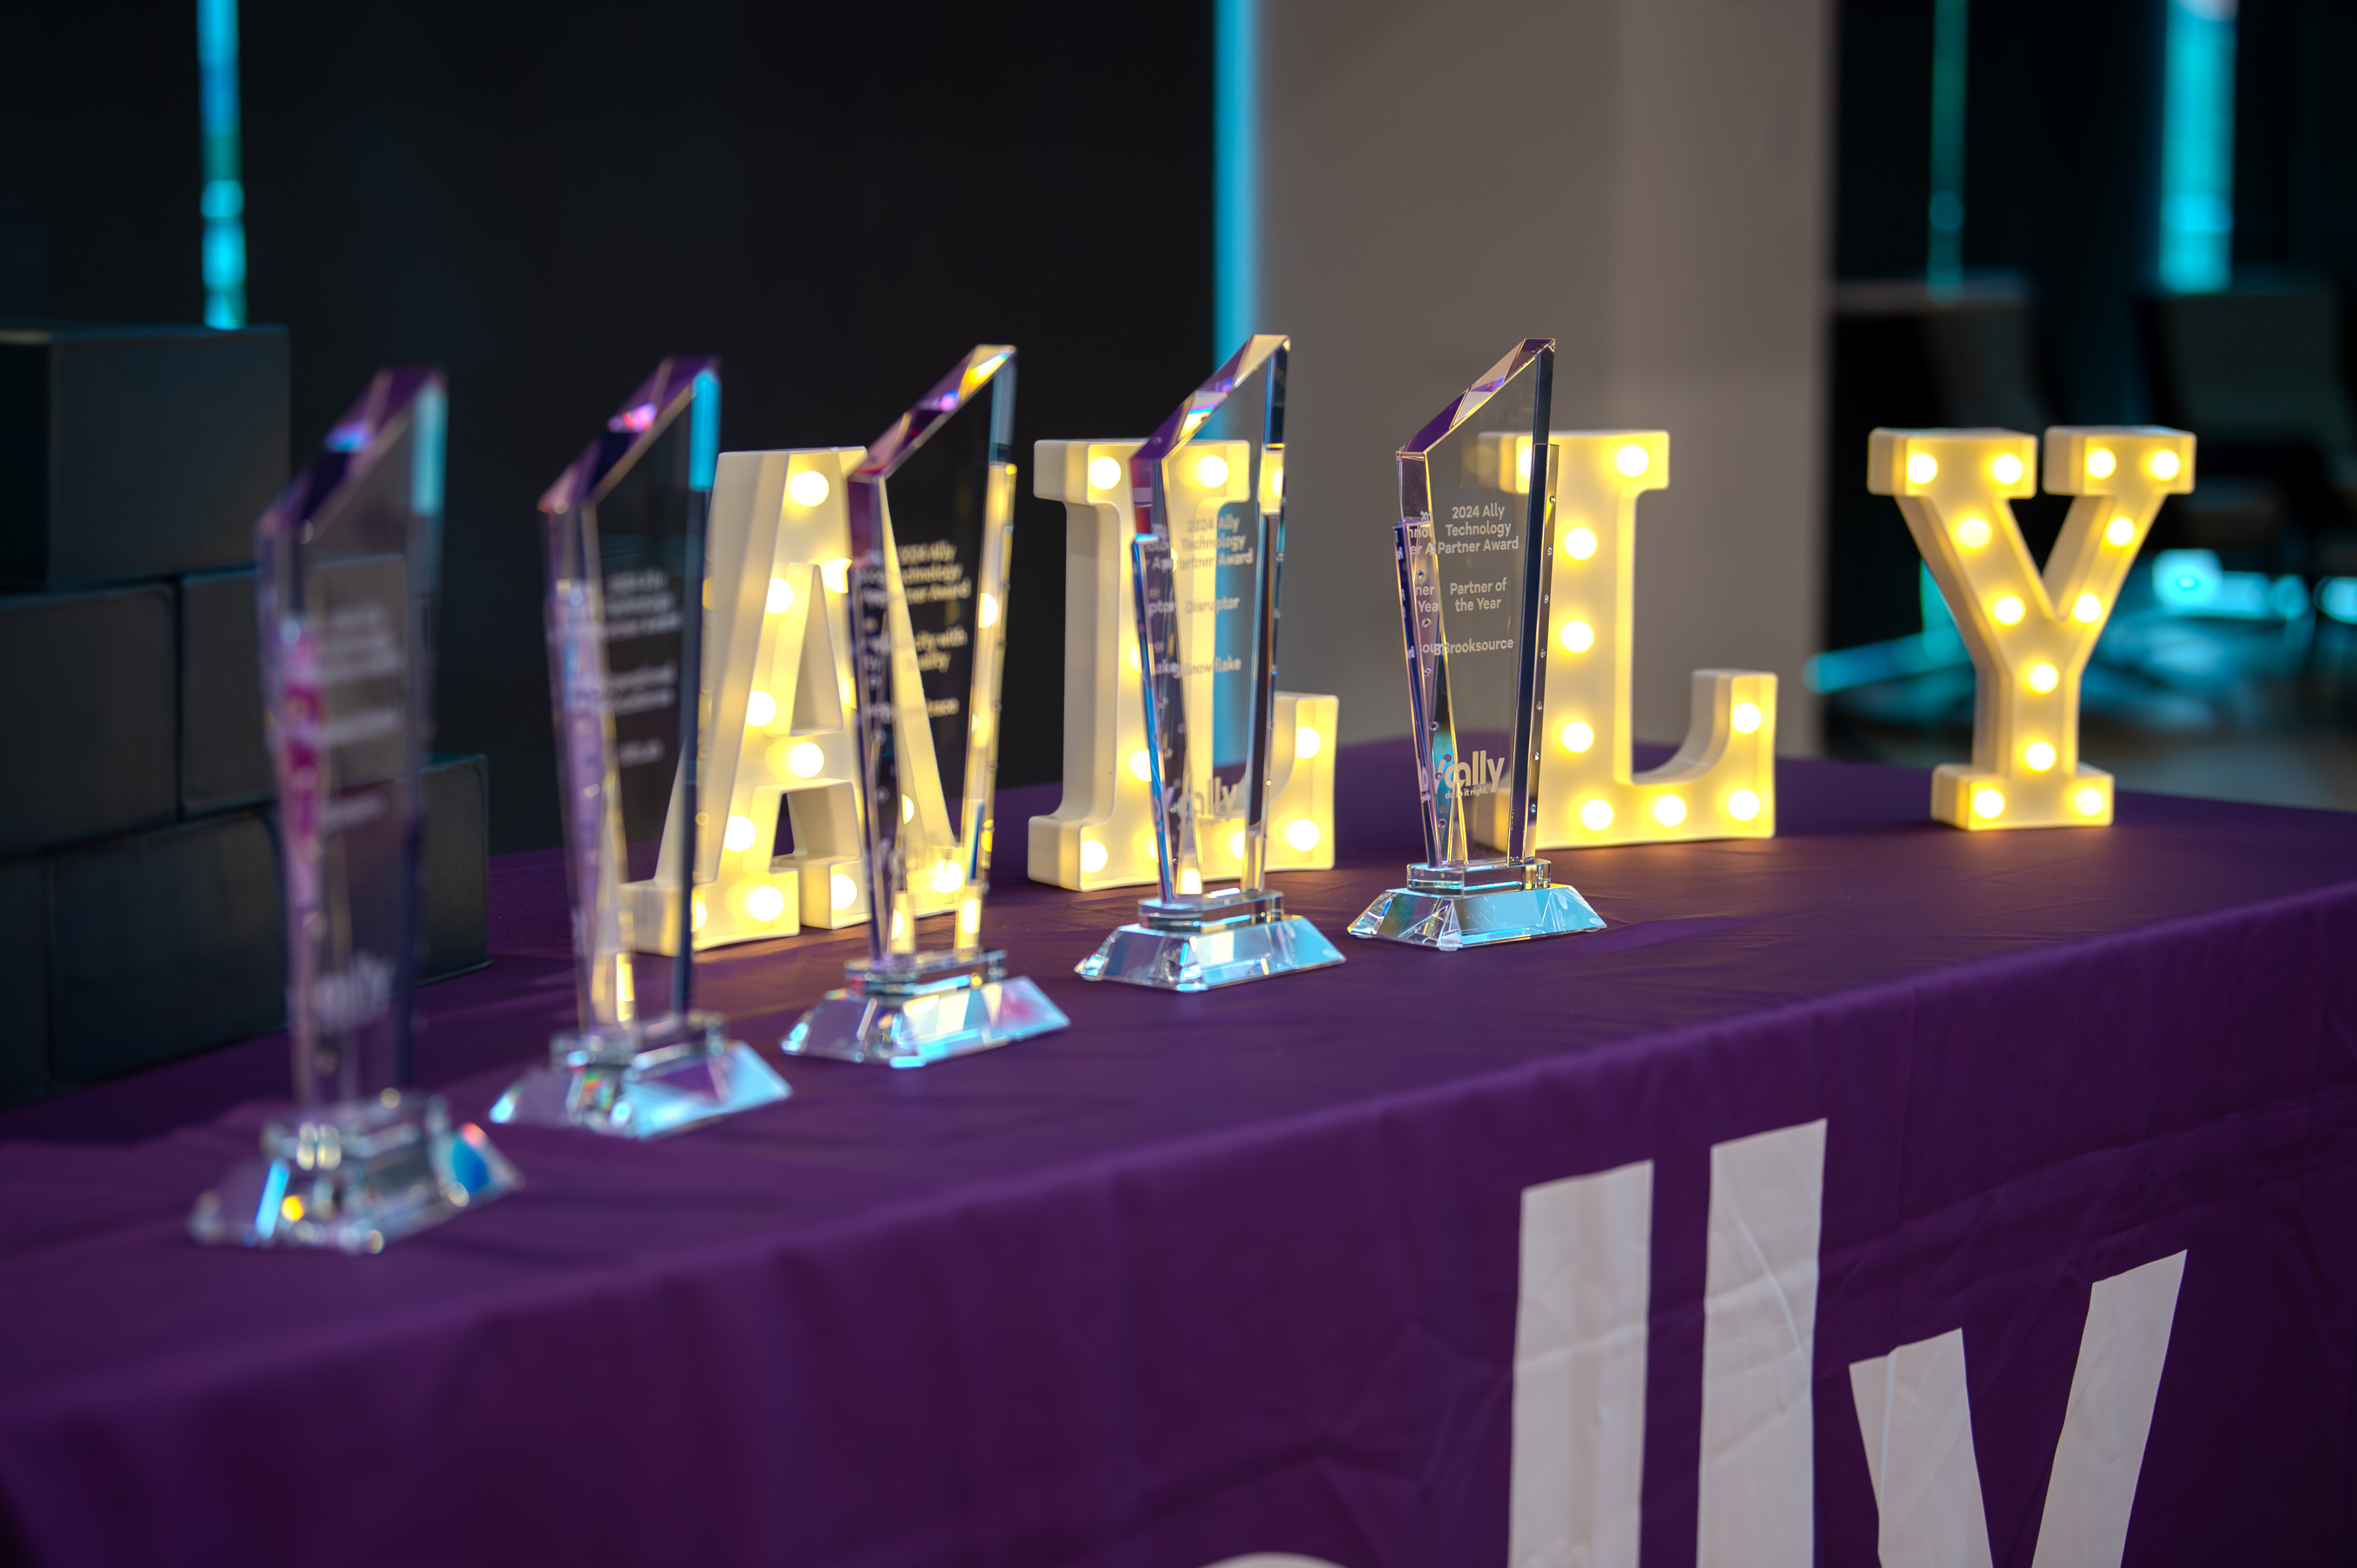 Image of Ally sign lit up with award statues in front.